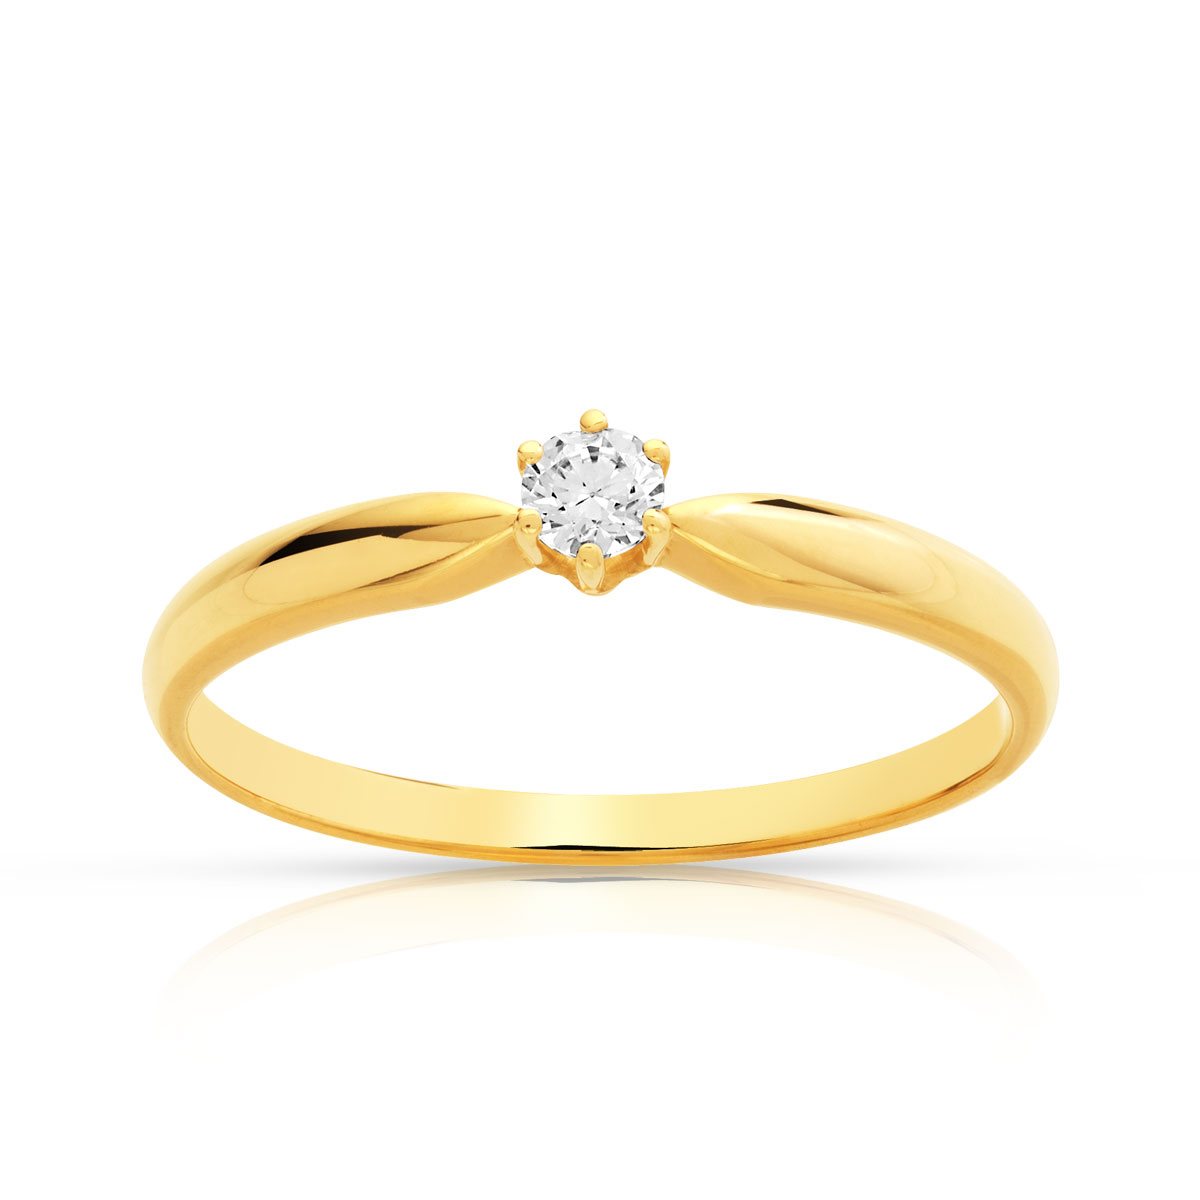 Solitaire or diamant 0.10 ct h/si